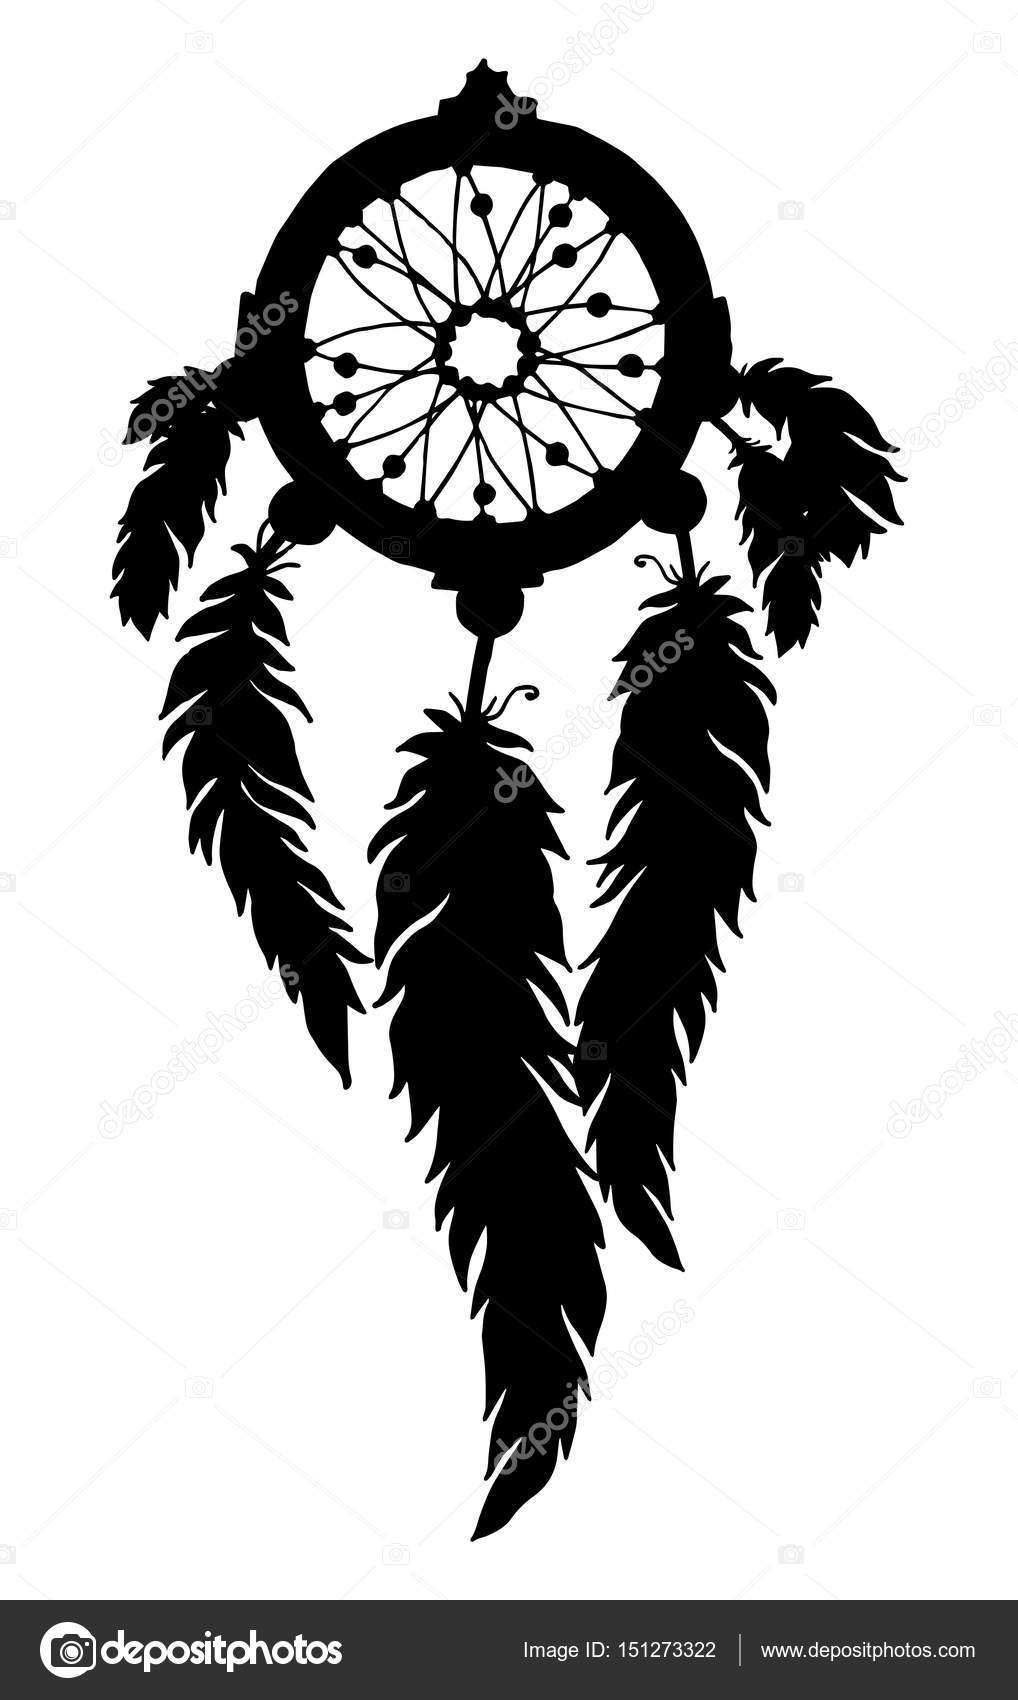 Dream catcher icon of native american with feather, silhouette